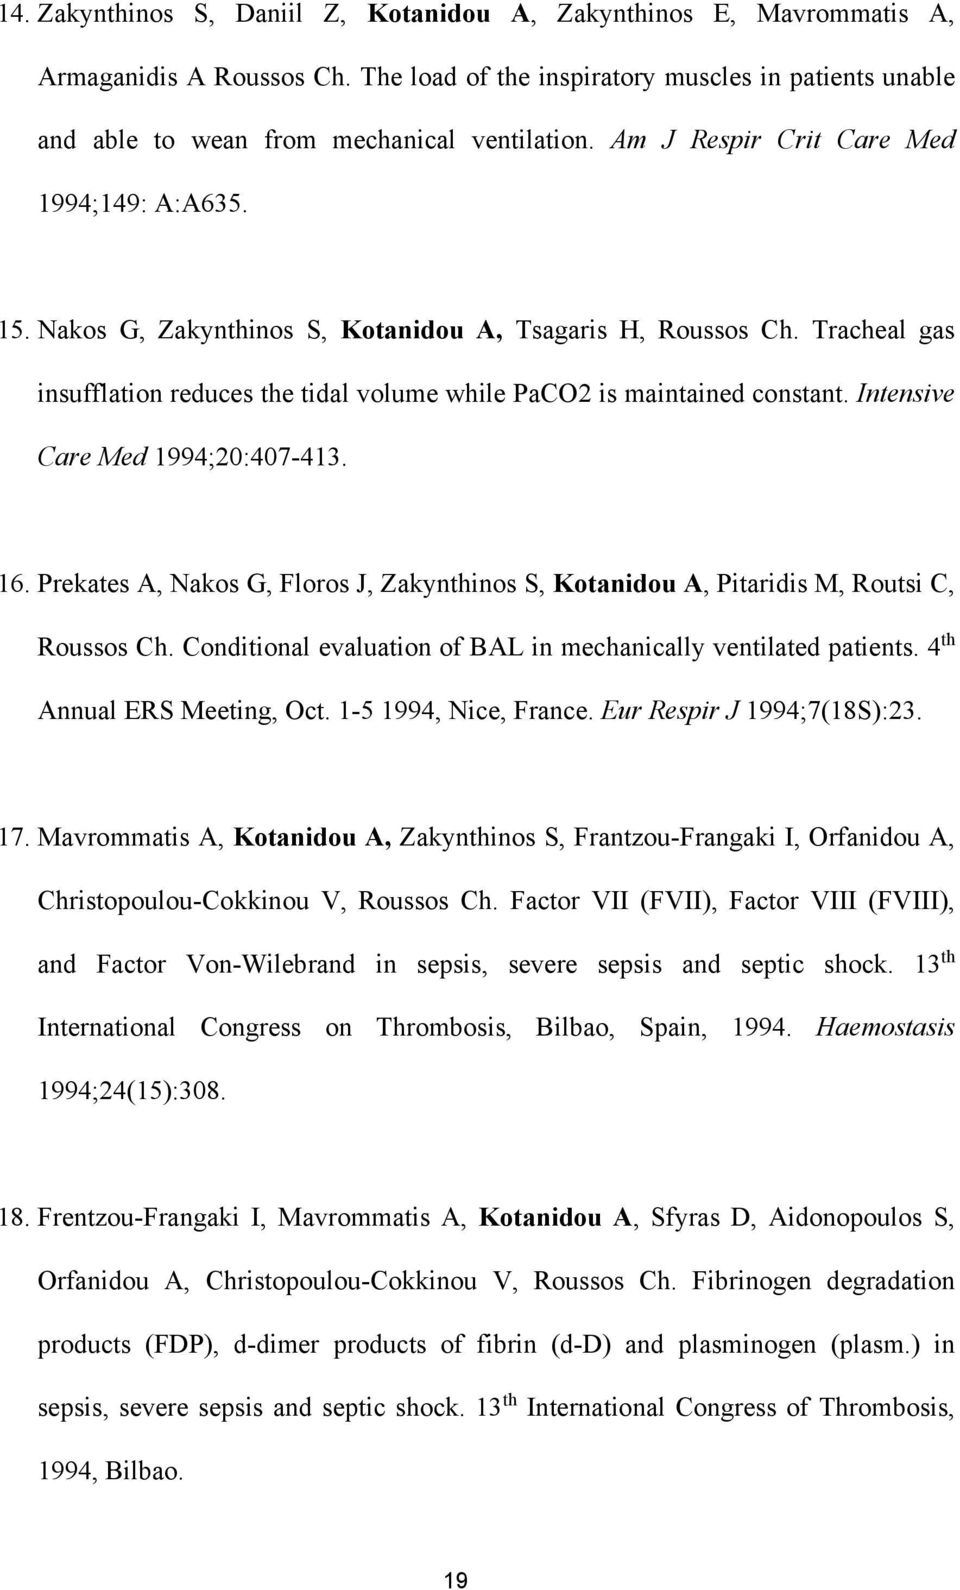 Intensive Care Med 1994;20:407-413. 16. Prekates A, Nakos G, Floros J, Zakynthinos S, Kotanidou A, Pitaridis M, Routsi C, Roussos Ch. Conditional evaluation of BAL in mechanically ventilated patients.